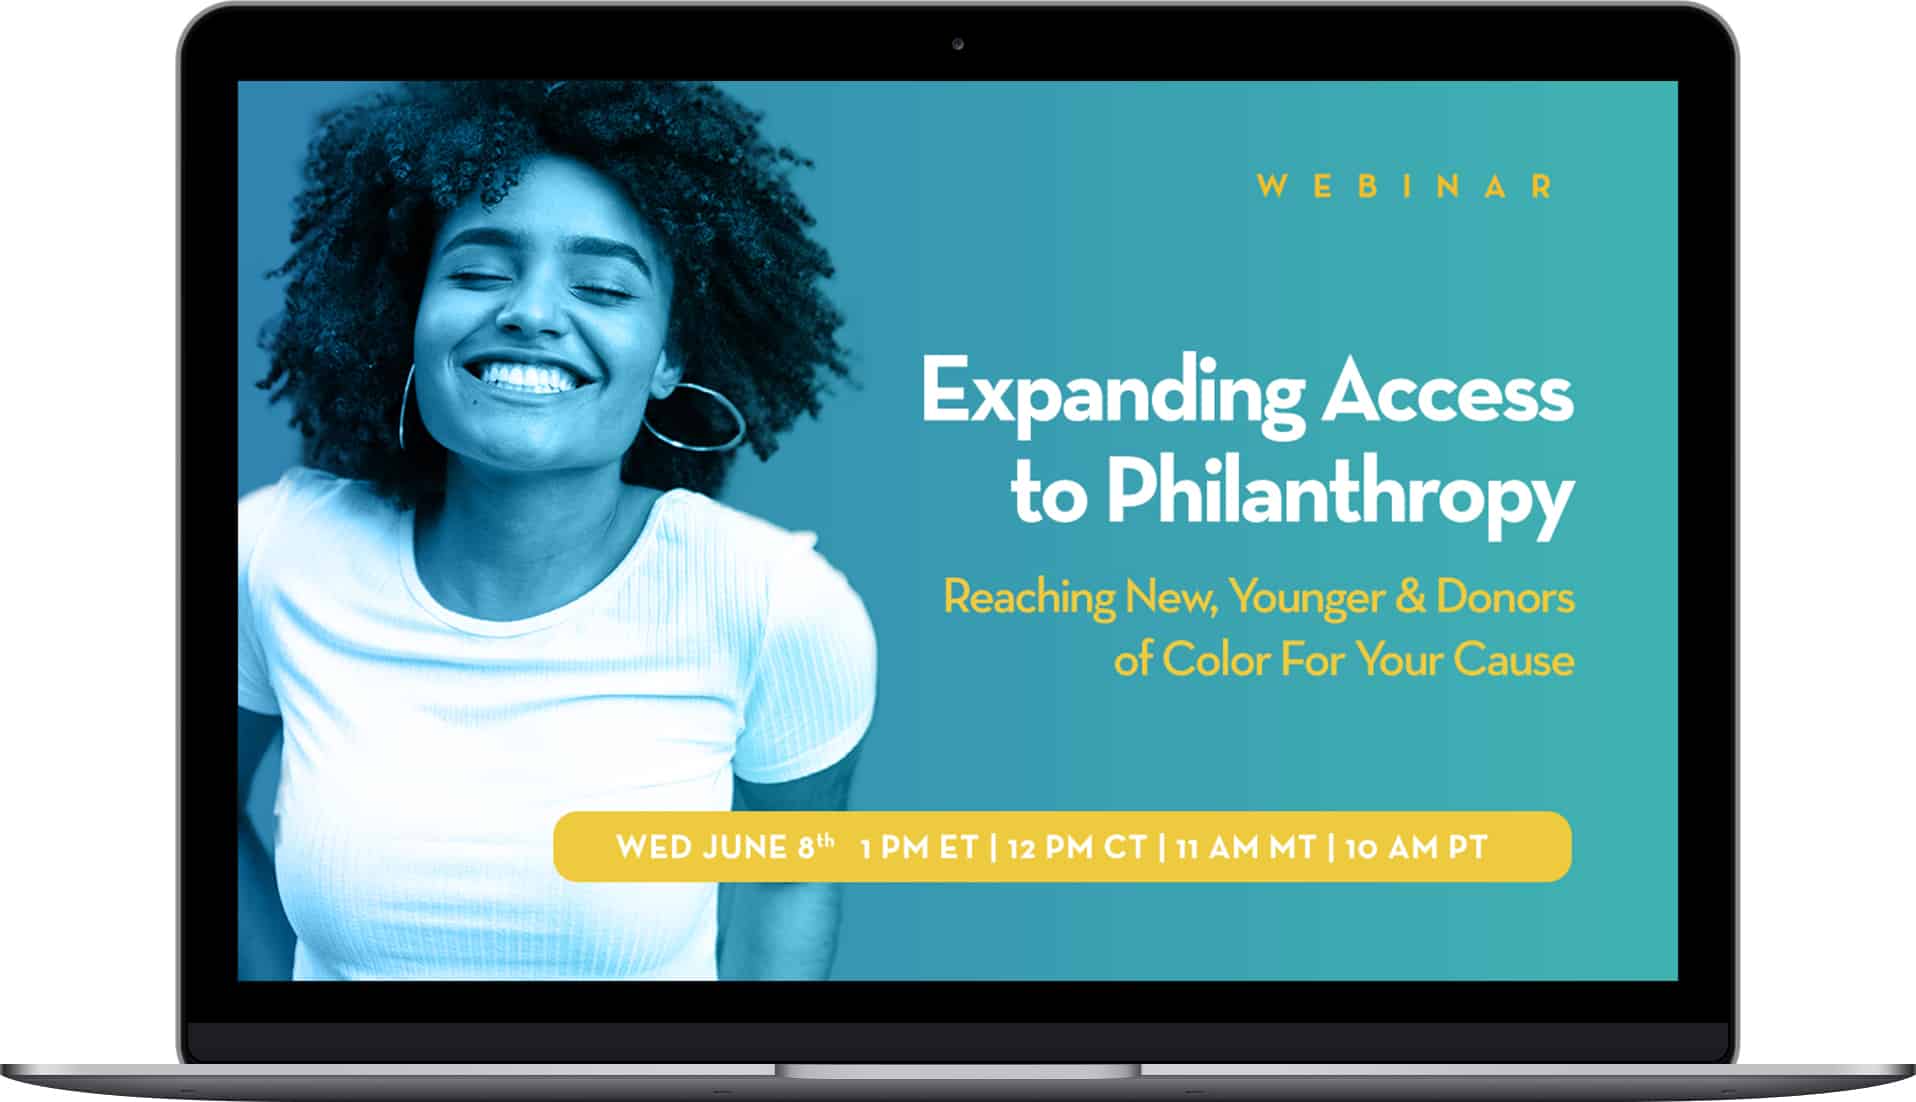 Expanding Access to Philanthropy